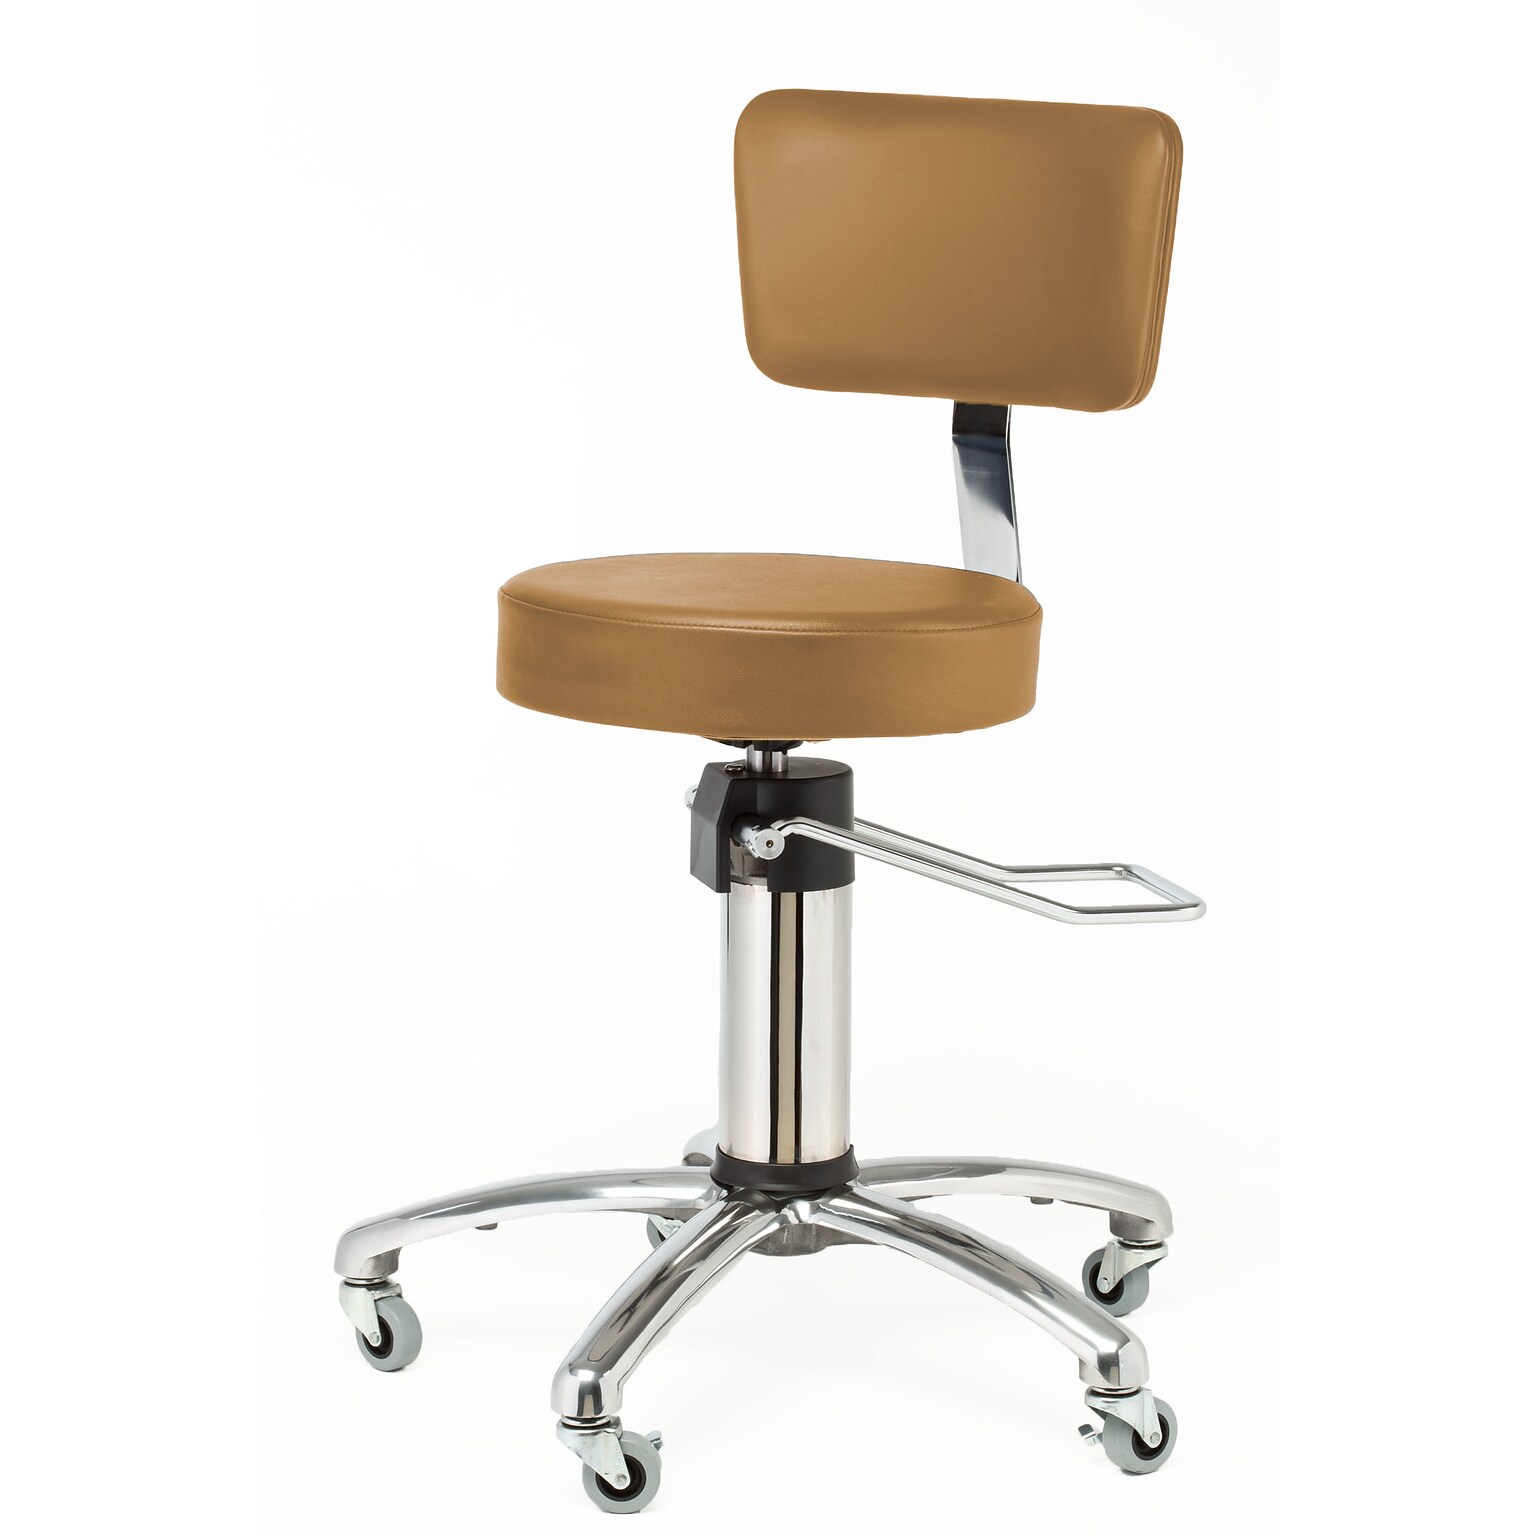 Brandt Hydraulic Surgeon Stool with Backrest with Backrest, Tan (15512TAN)